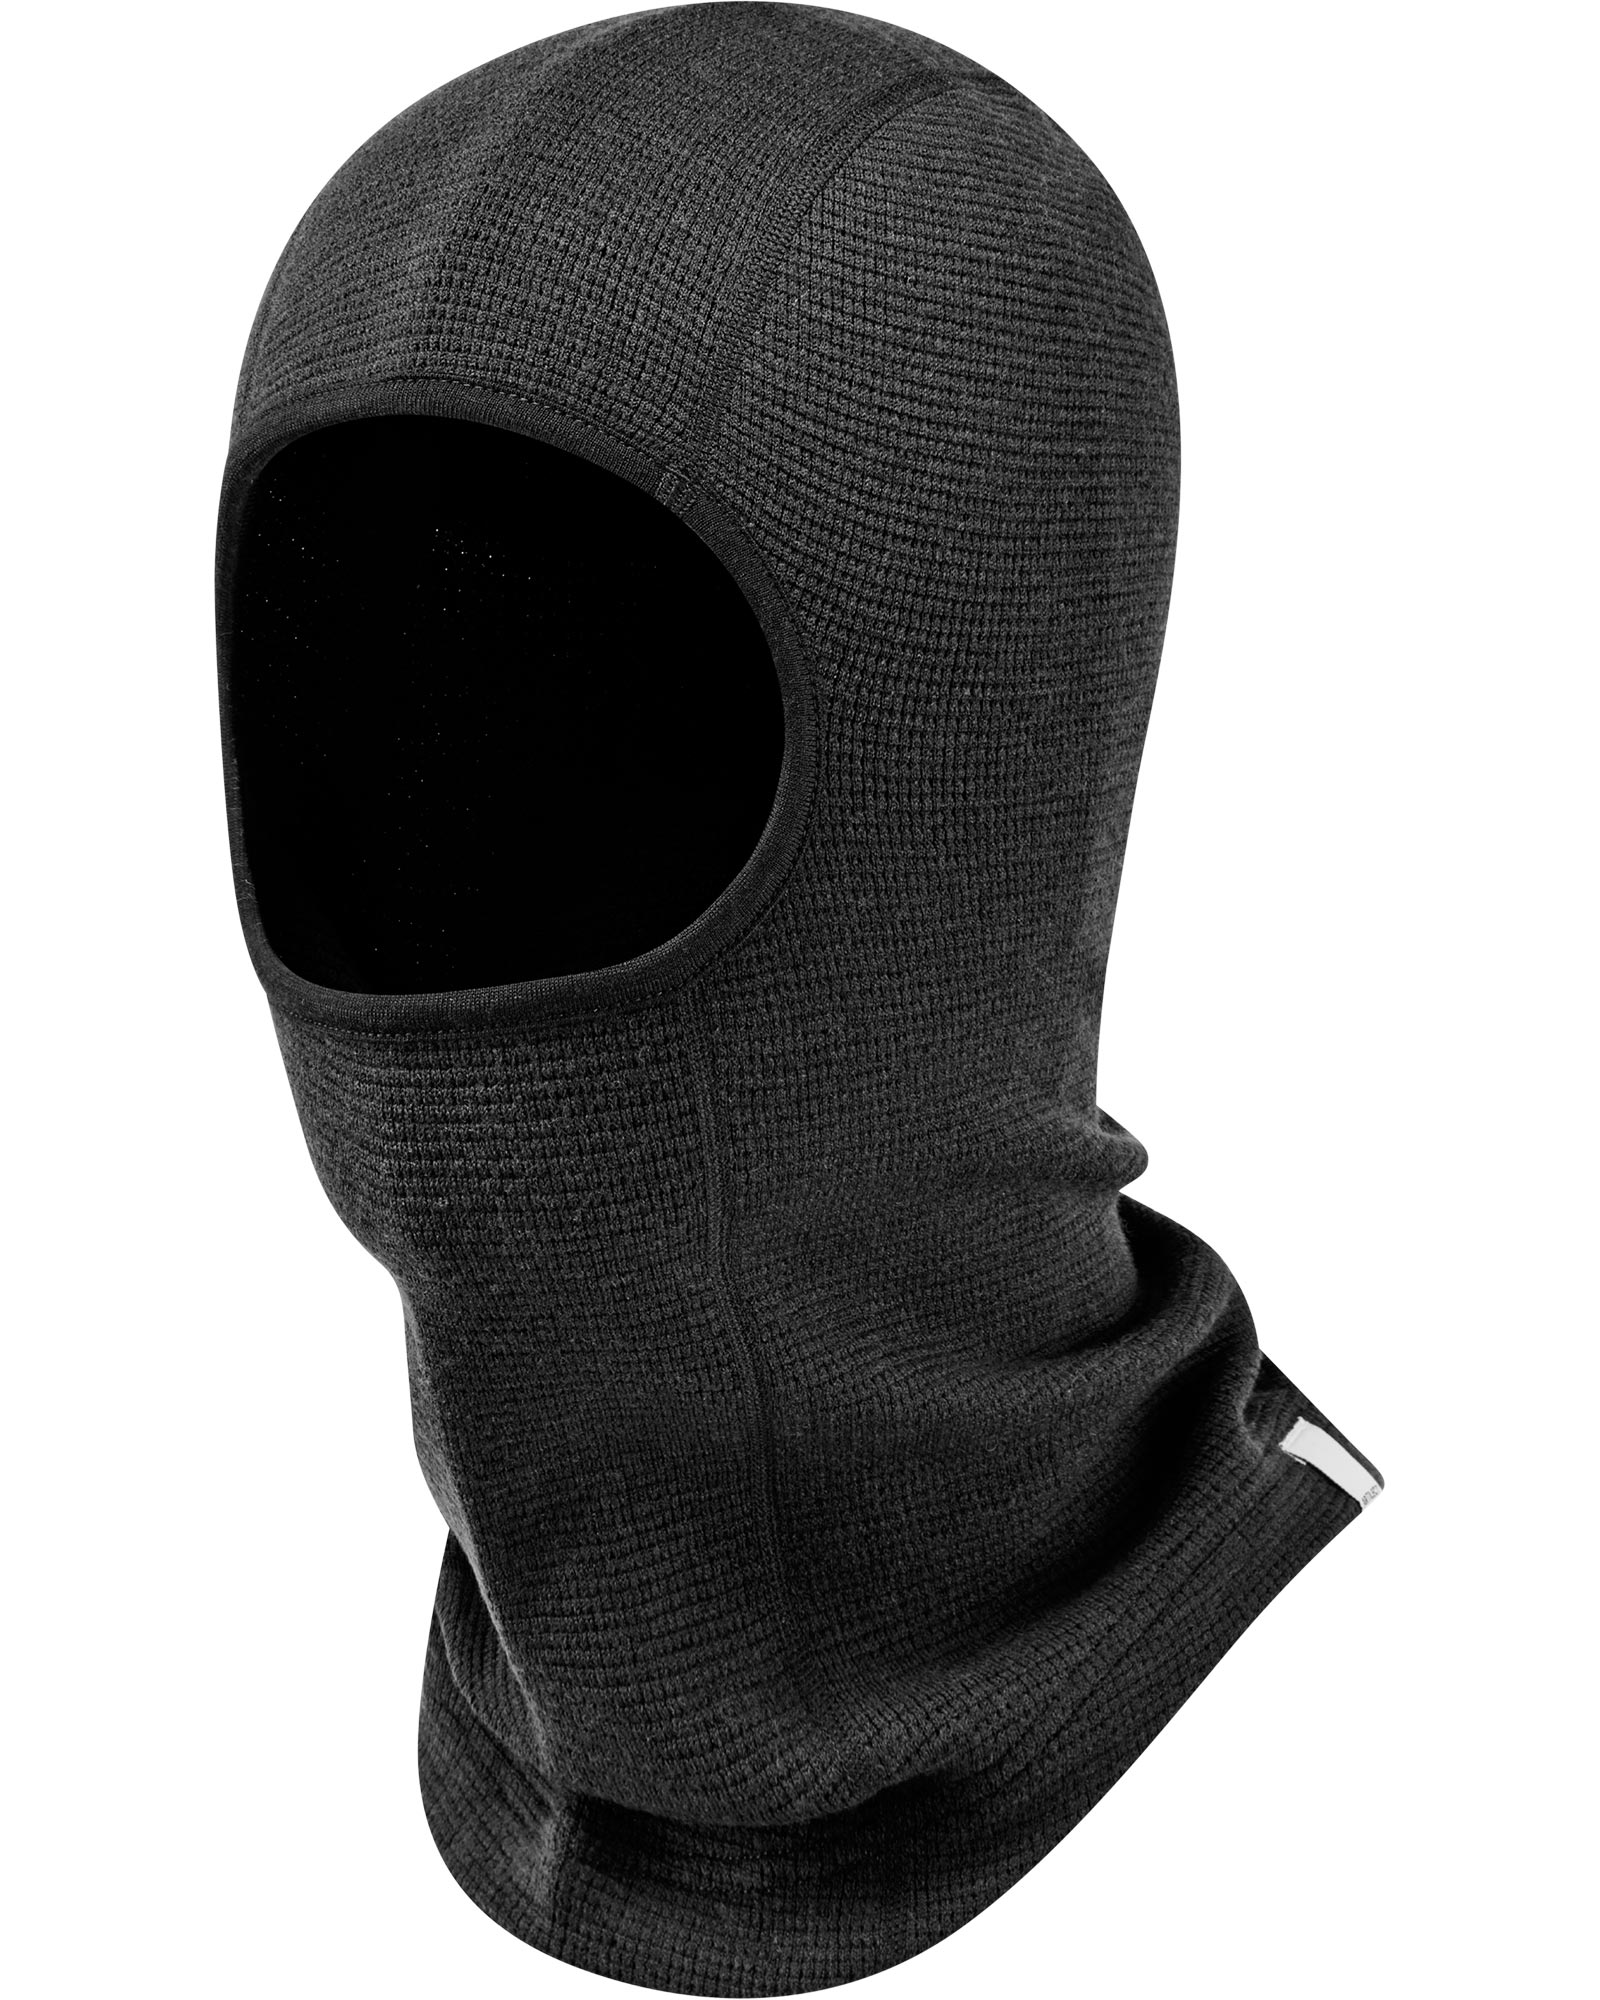 Product image of Artilect Valley 250 Balaclava